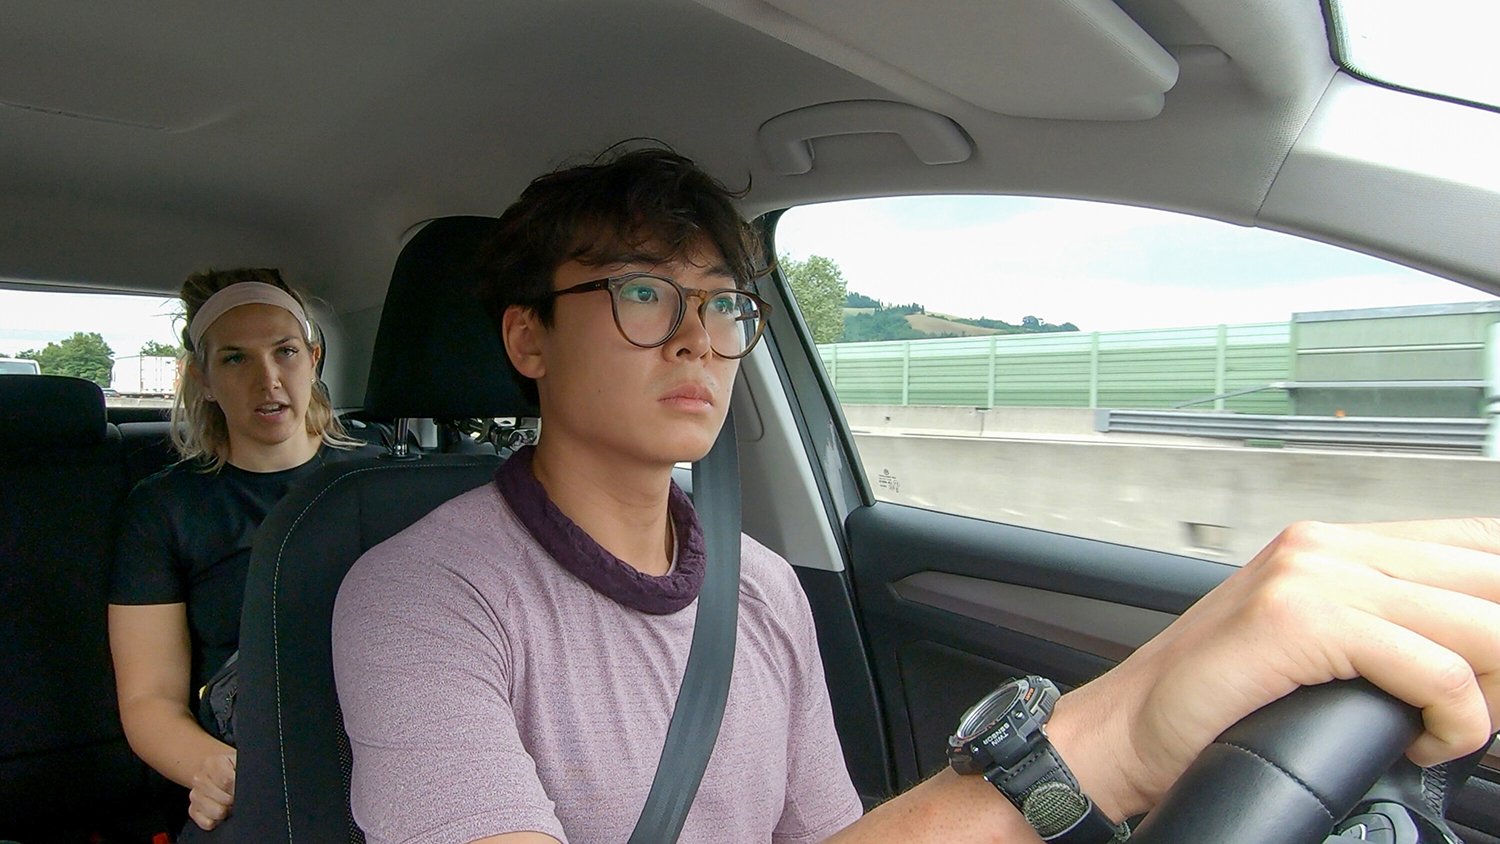 Claire Rehfuss sits in the backseat while Derek Xiao drives a car on The Amazing Race Season 34.